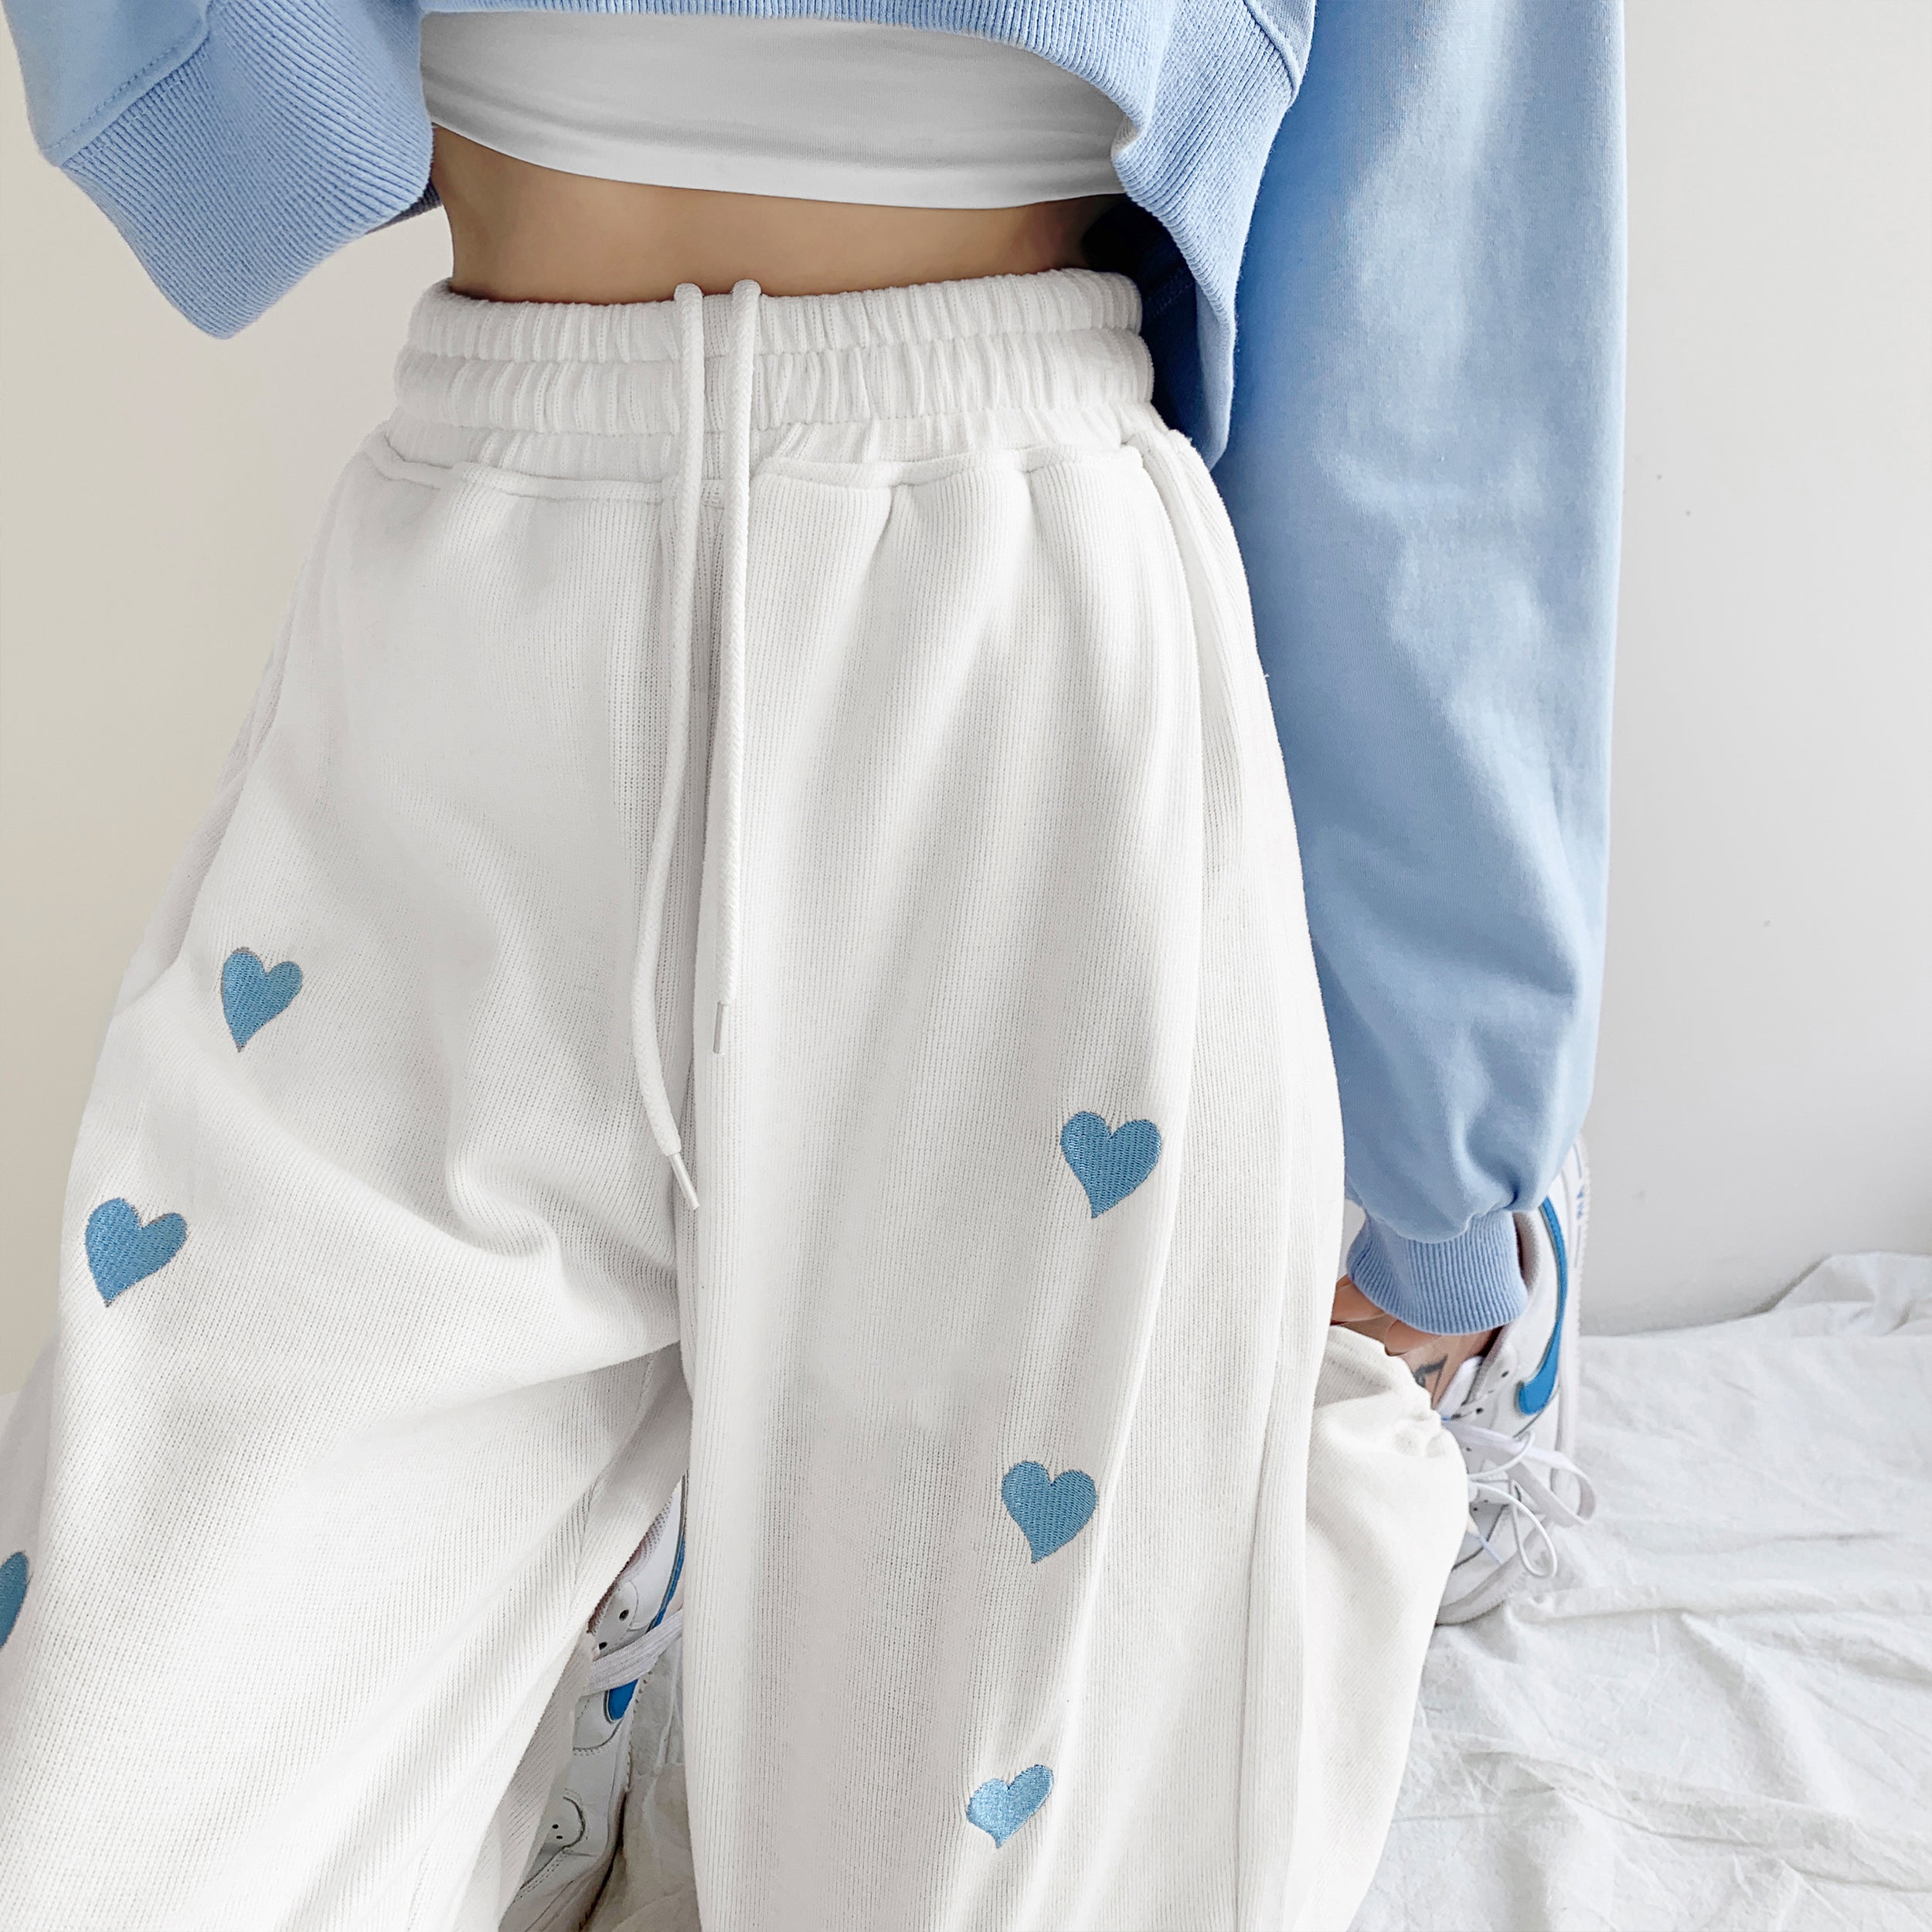 All Hearts Connected drawstring sweatpants